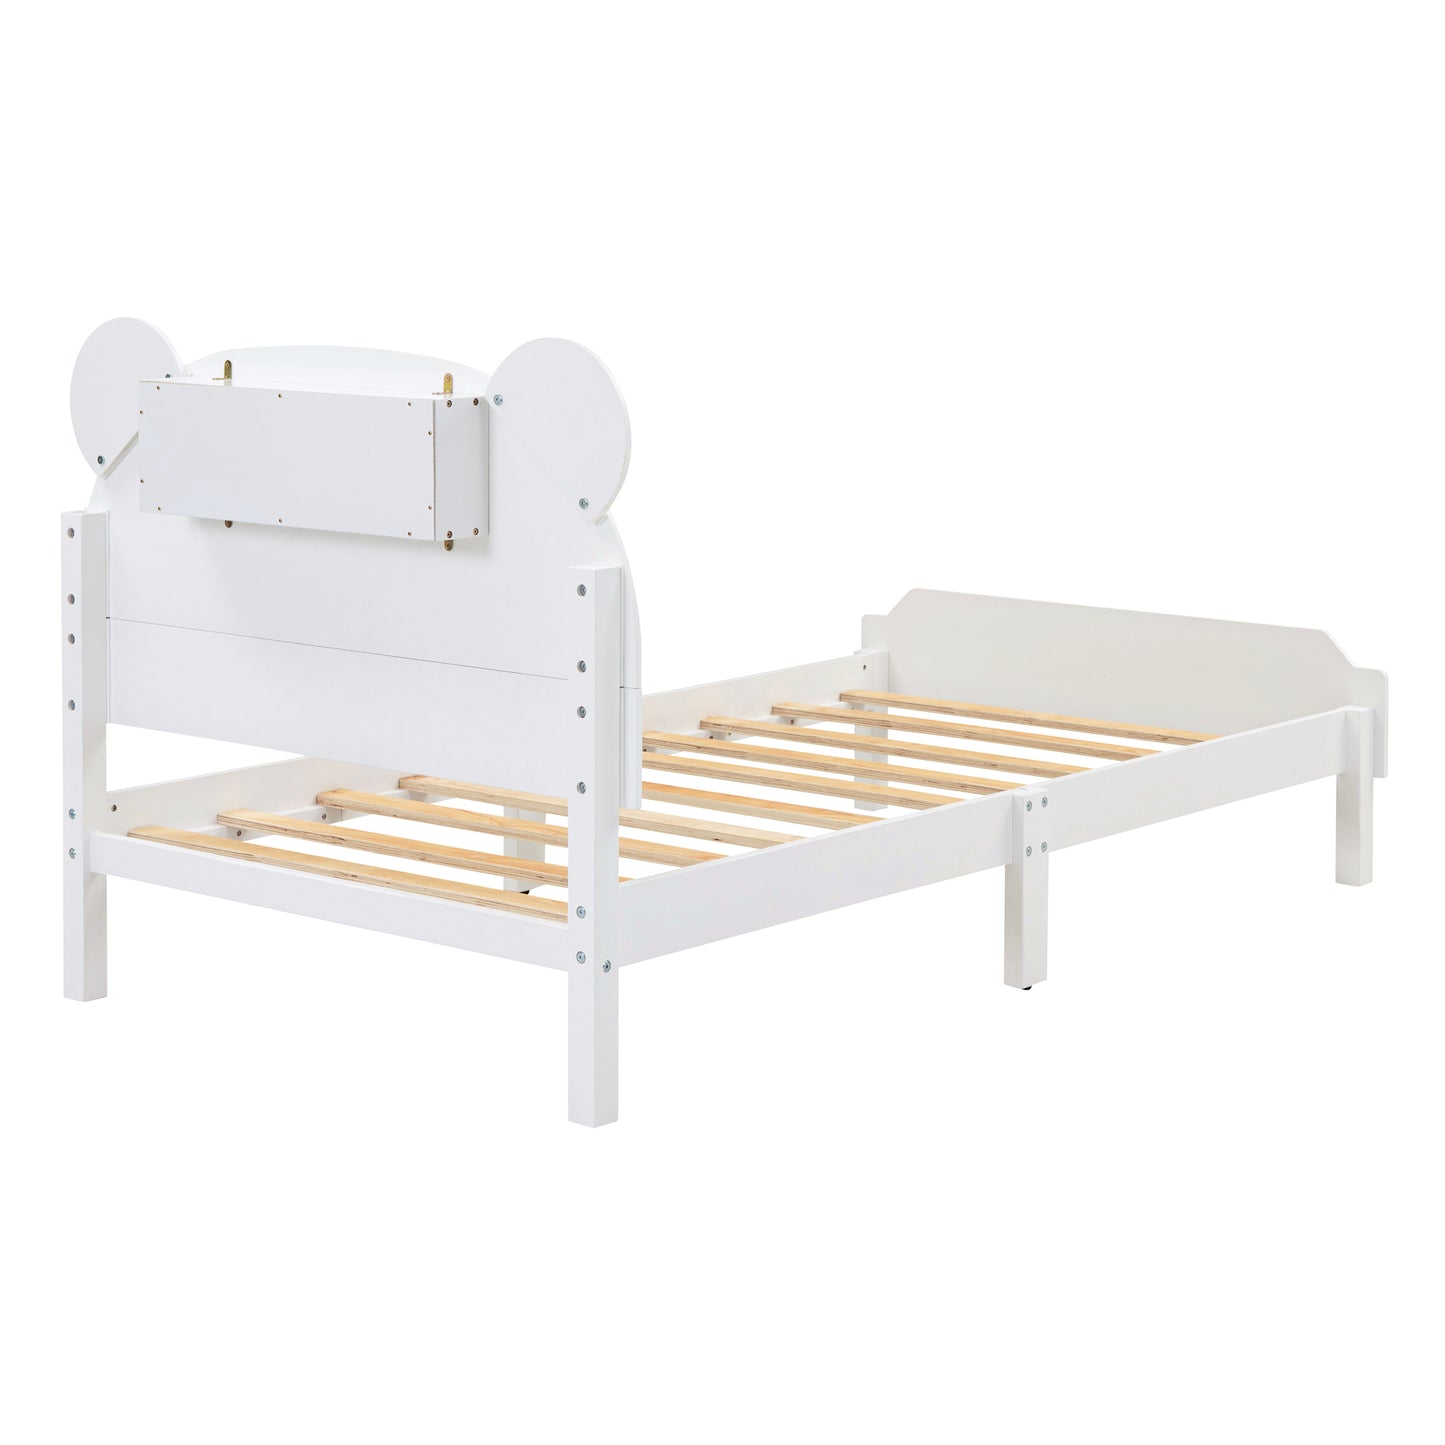 Twin Size Wood Platform Bed with Bear-shaped Headboard,Bed with Motion Activated Night Lights,White